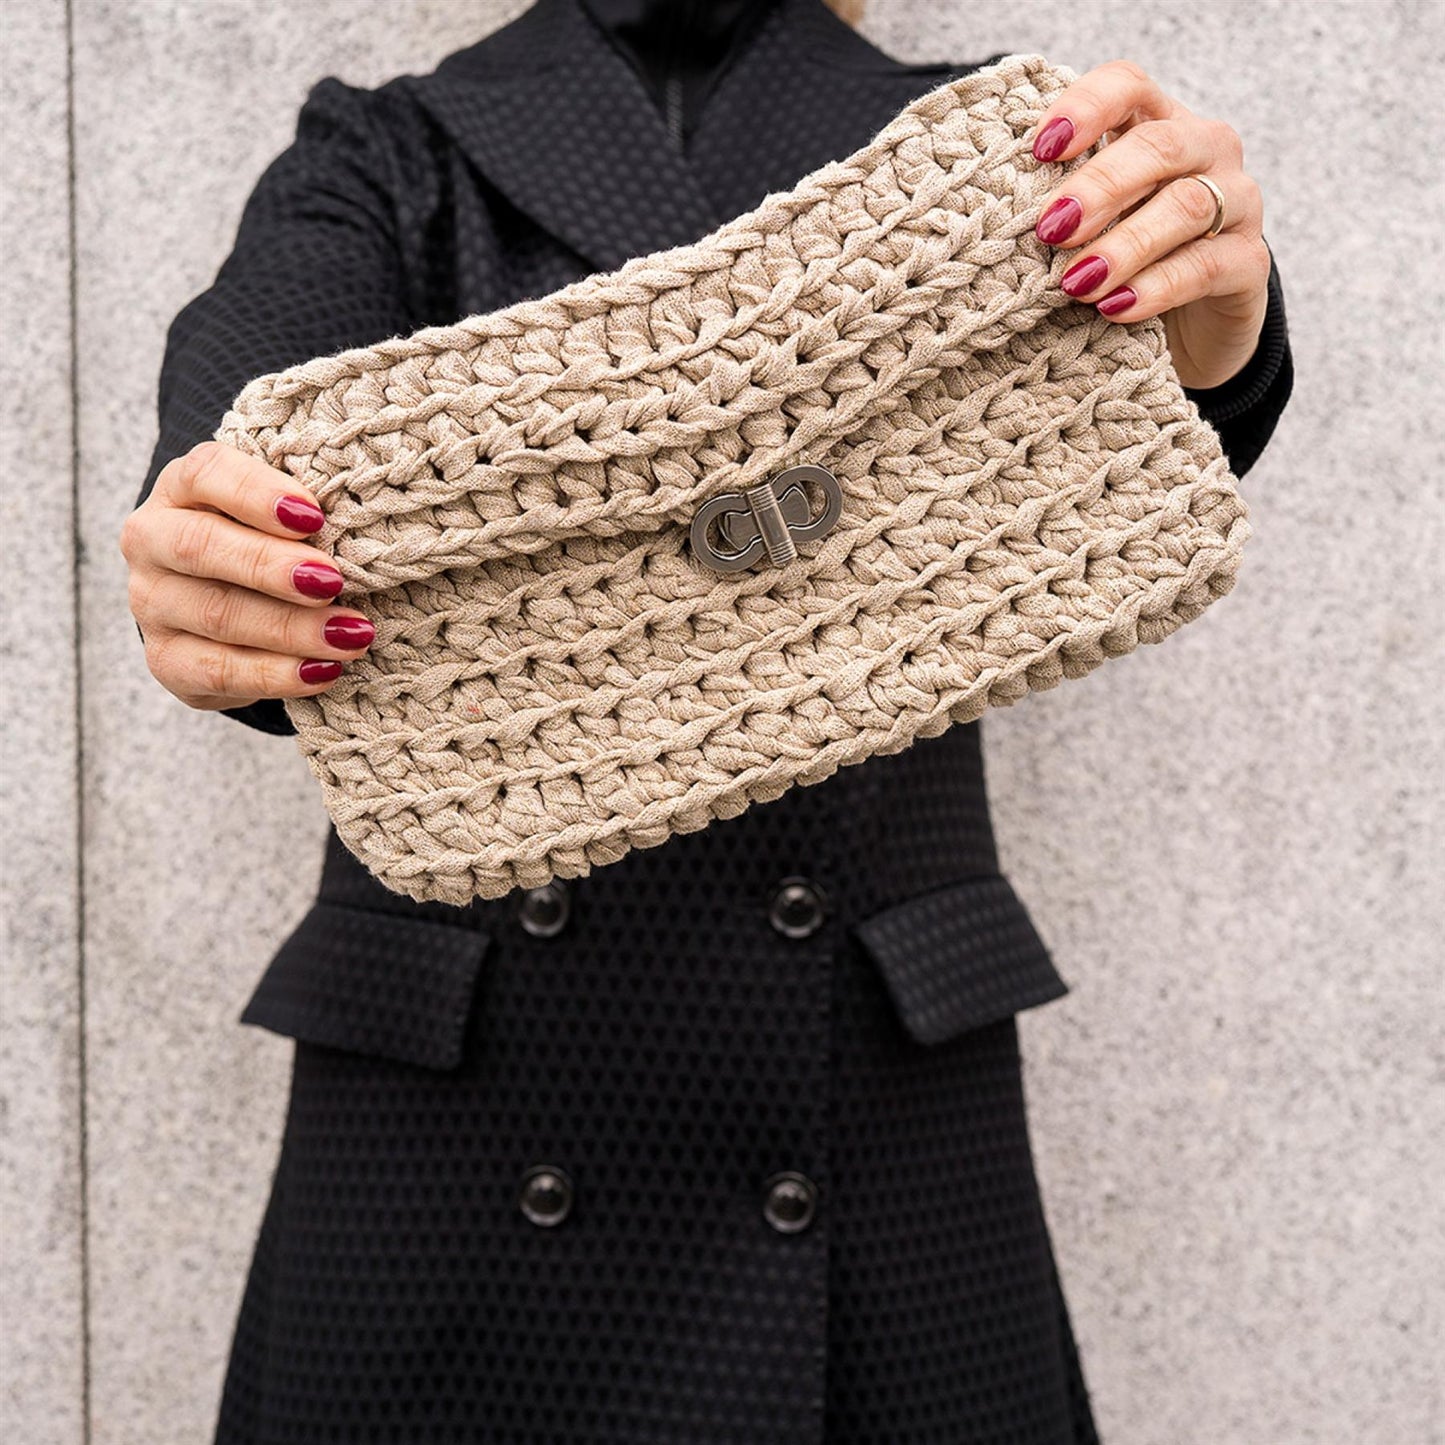 Hoooked RibbonXL Gold Dust Cotton Charly Clutch Crochet Kit